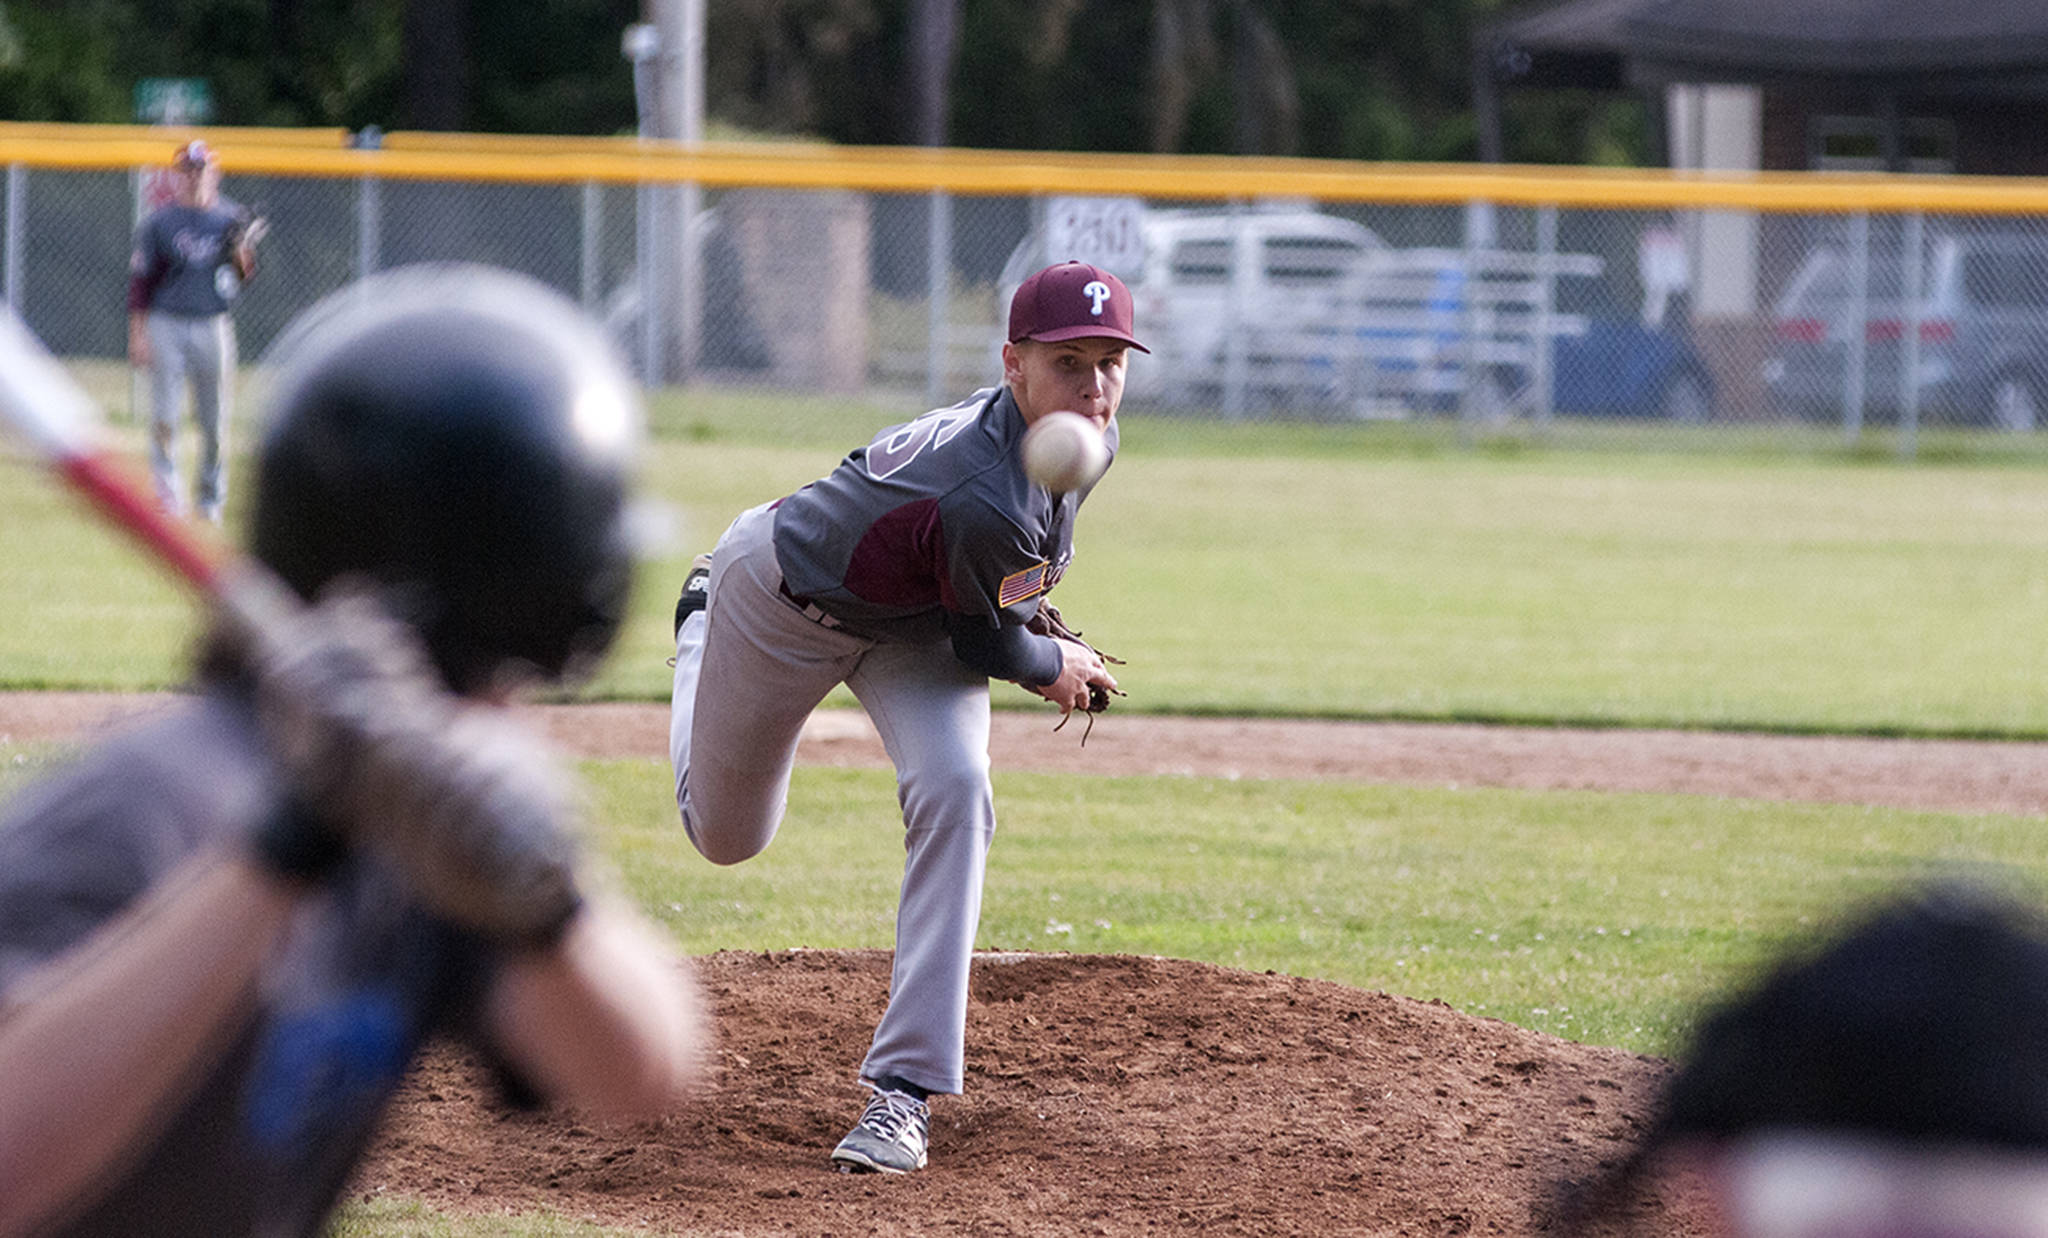 (Brendan Carl | The Daily World) Precision Pipe’s Drew Rose pitches against Elma Pharmacy on Tuesday. Rose allowed just two hits in the game and struck out nine in seven innings of work.